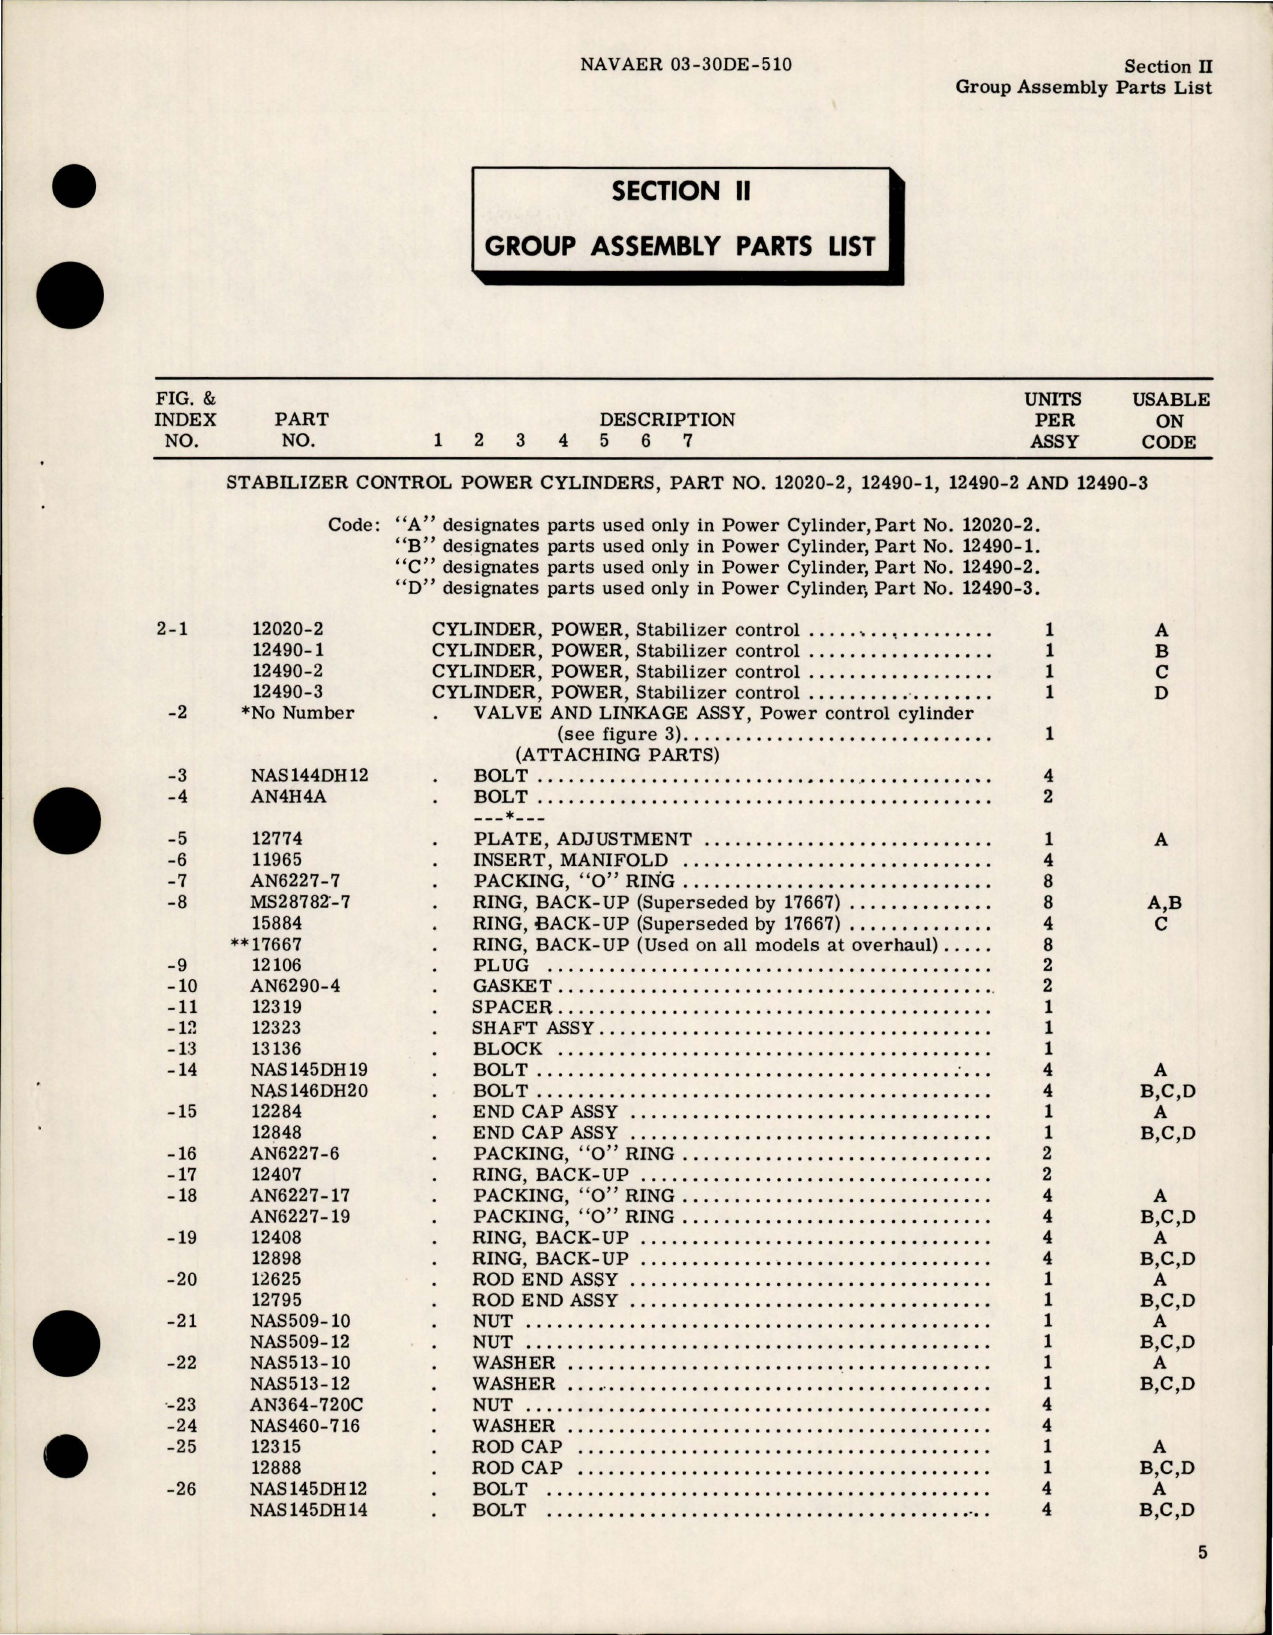 Sample page 7 from AirCorps Library document: Illustrated Parts Breakdown for Stabilizer Control Power Cylinders - Parts 12020-2, 12490-1, 12490-2, 12490-3 